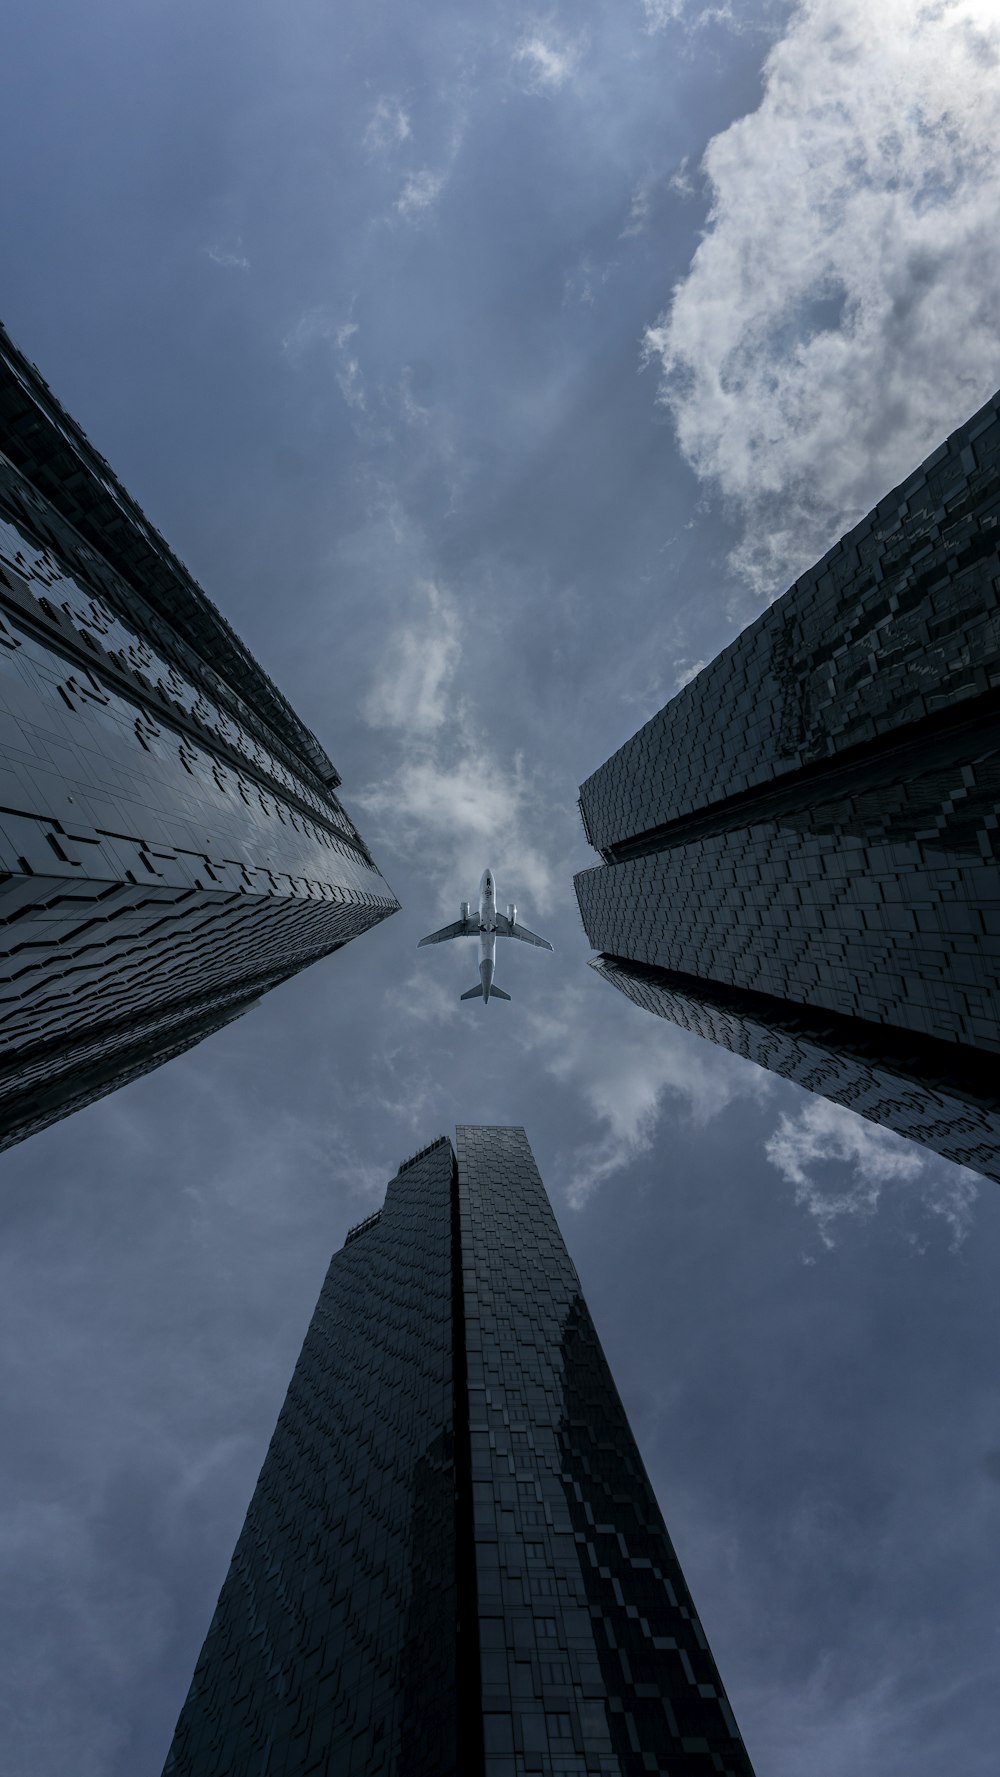 a helicopter flying between two tall buildings